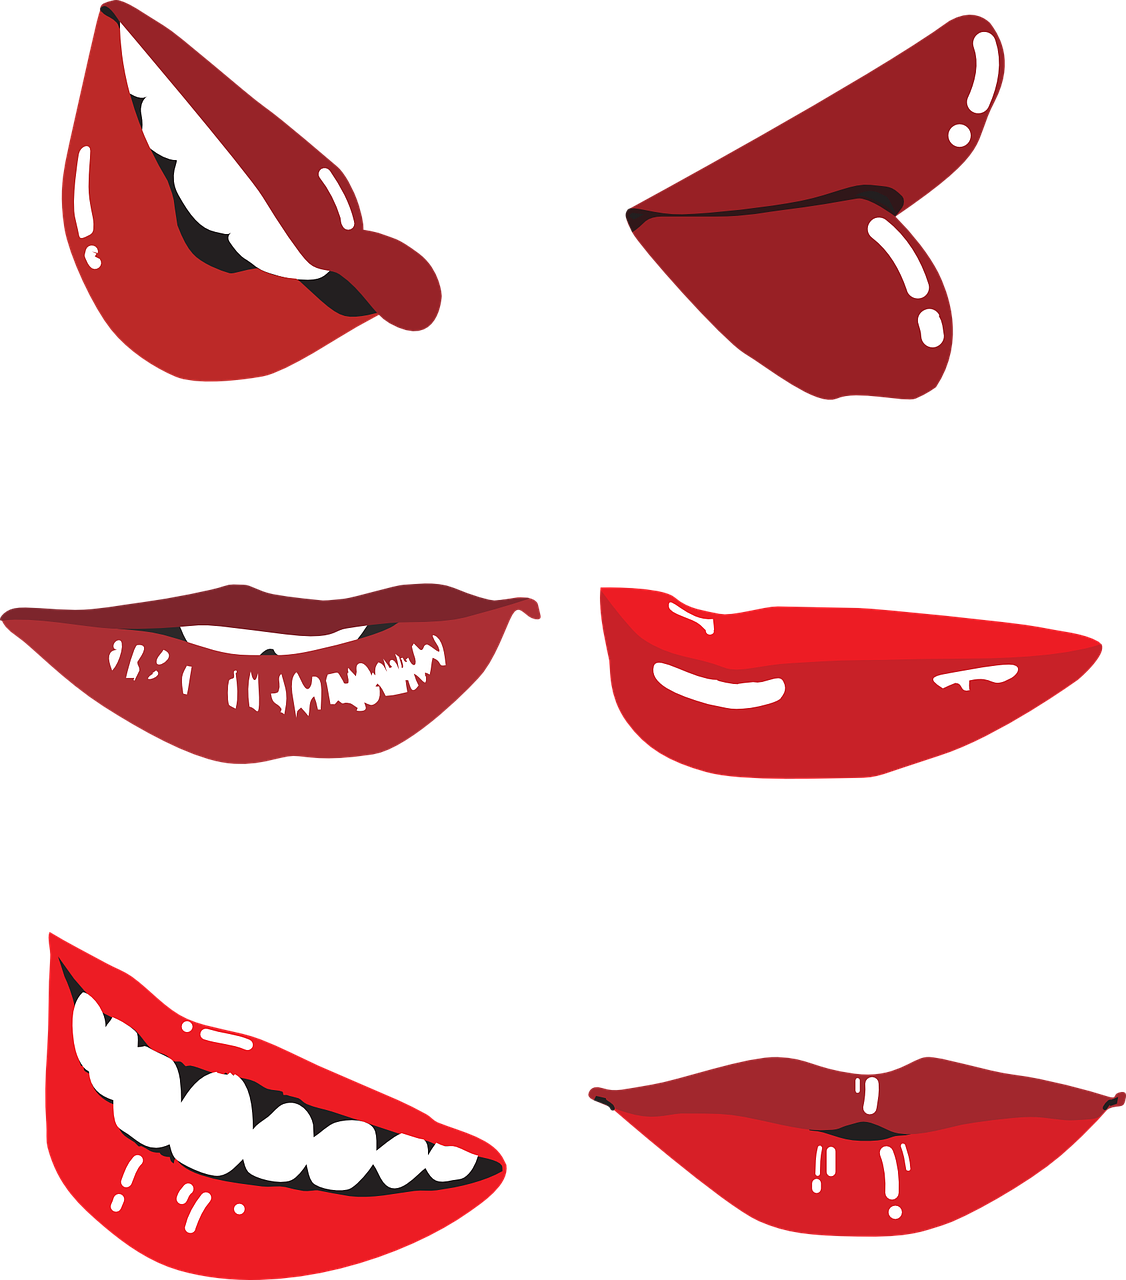 Varietyof Cartoon Mouth Expressions